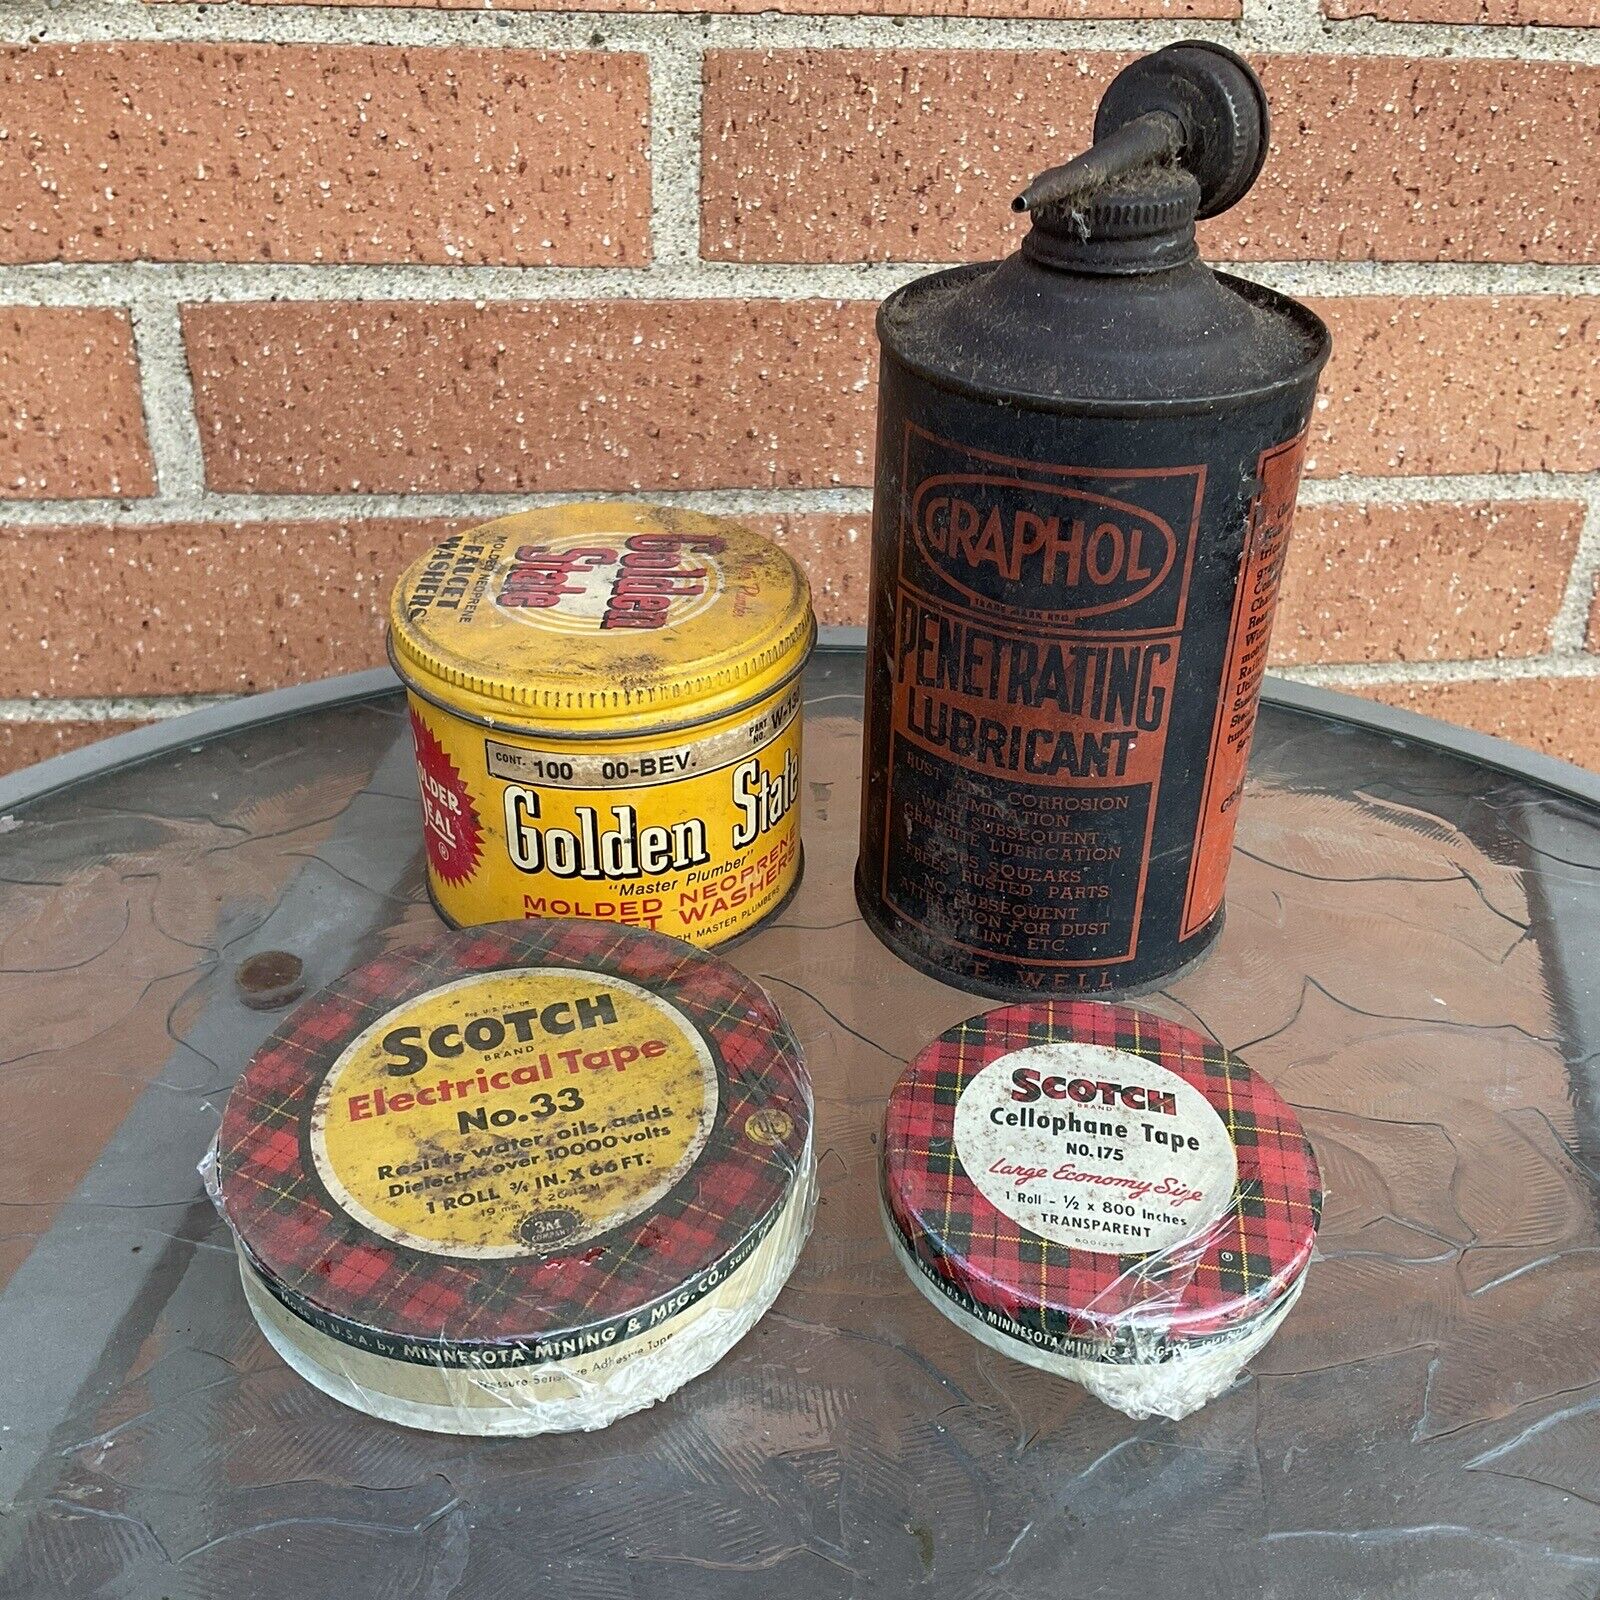 Golden State Lot of Vintage Garage Tins: Lubricant, Electrical and Scotch Tape